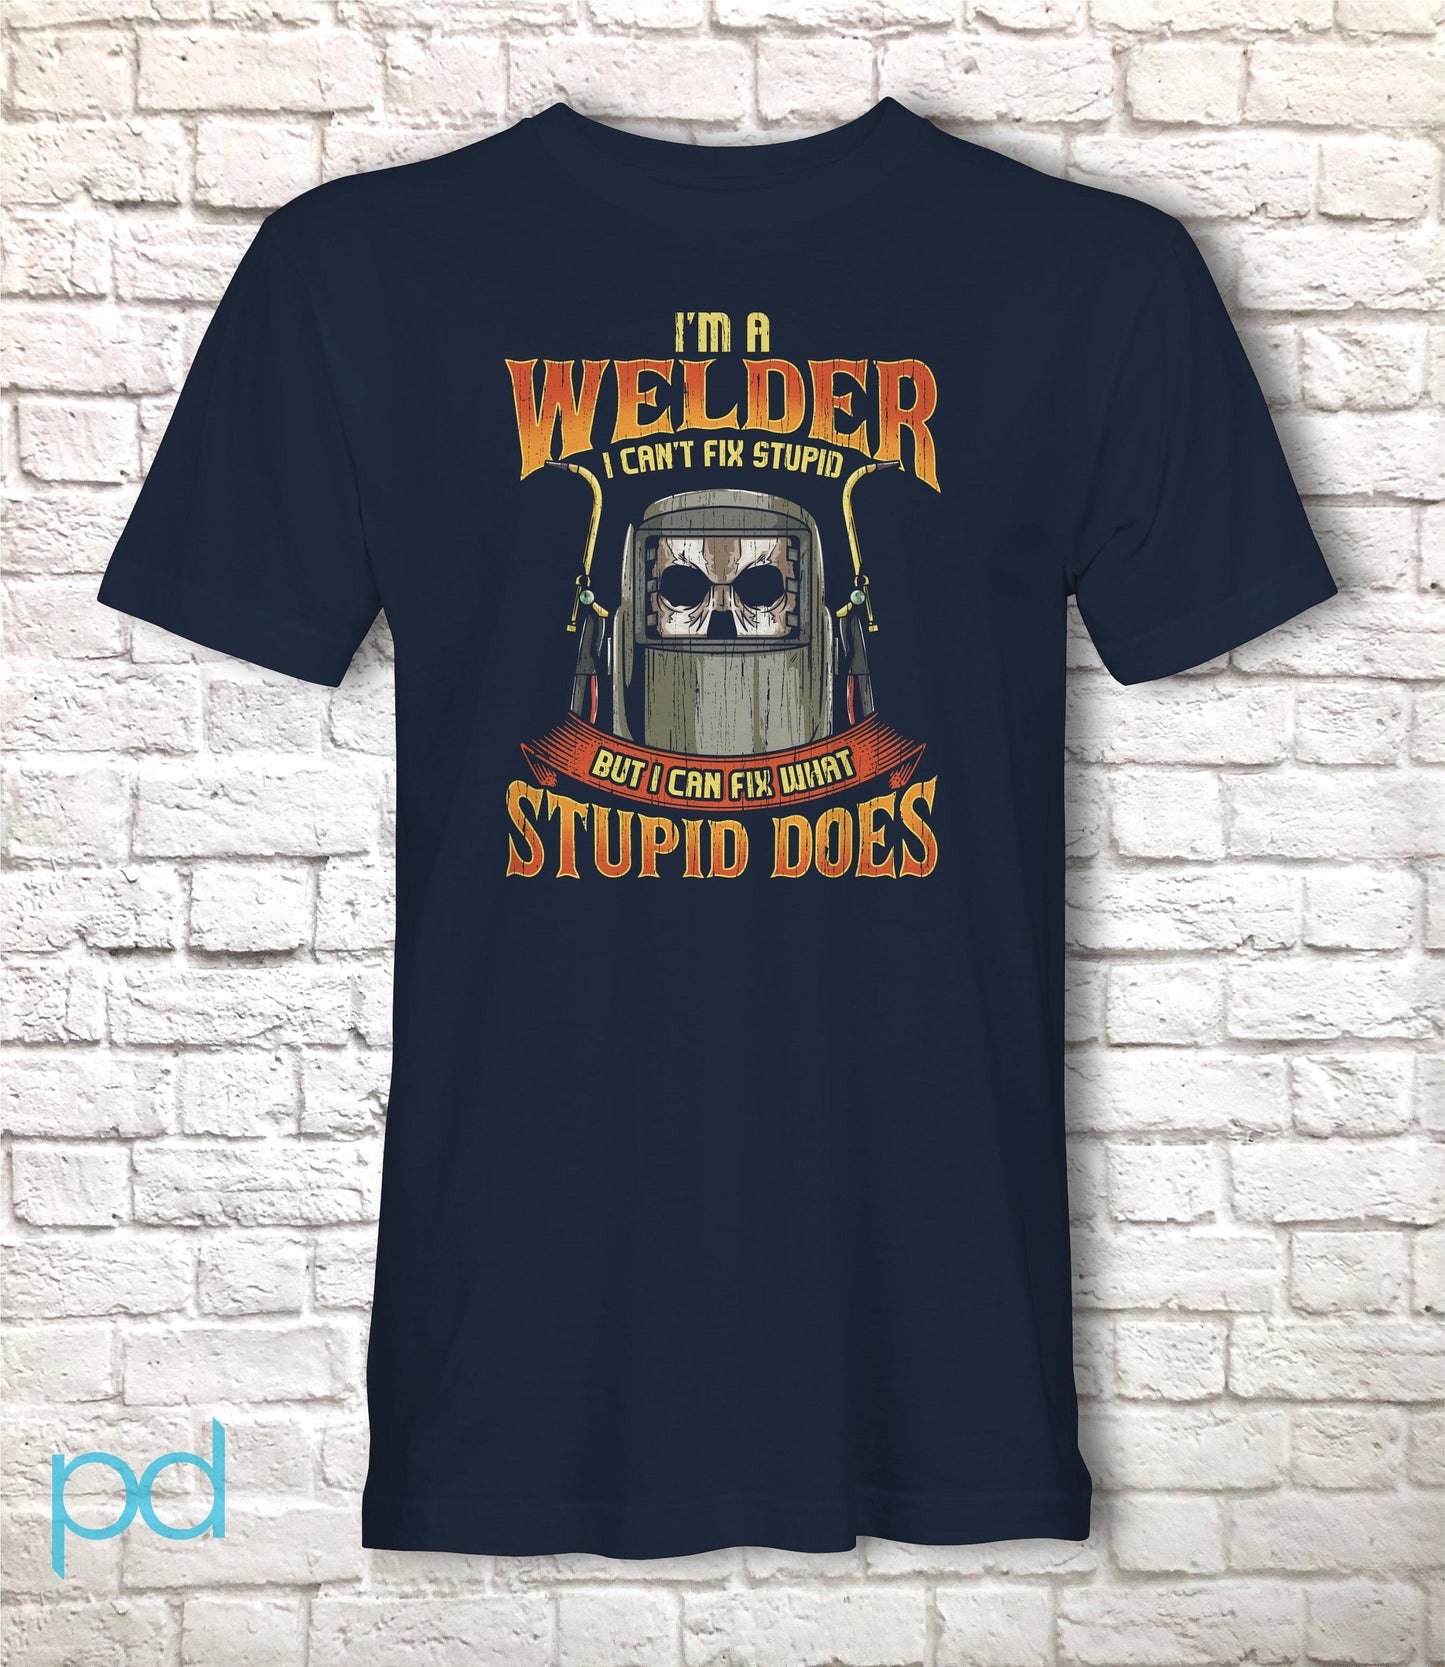 Funny Welder T-Shirt, I&#39;m A Welder I Can&#39;t Fix Stupid But I Can Fix What Stupid Does Pun Gift Idea, Humorous Welder Gift Tee Shirt T Top